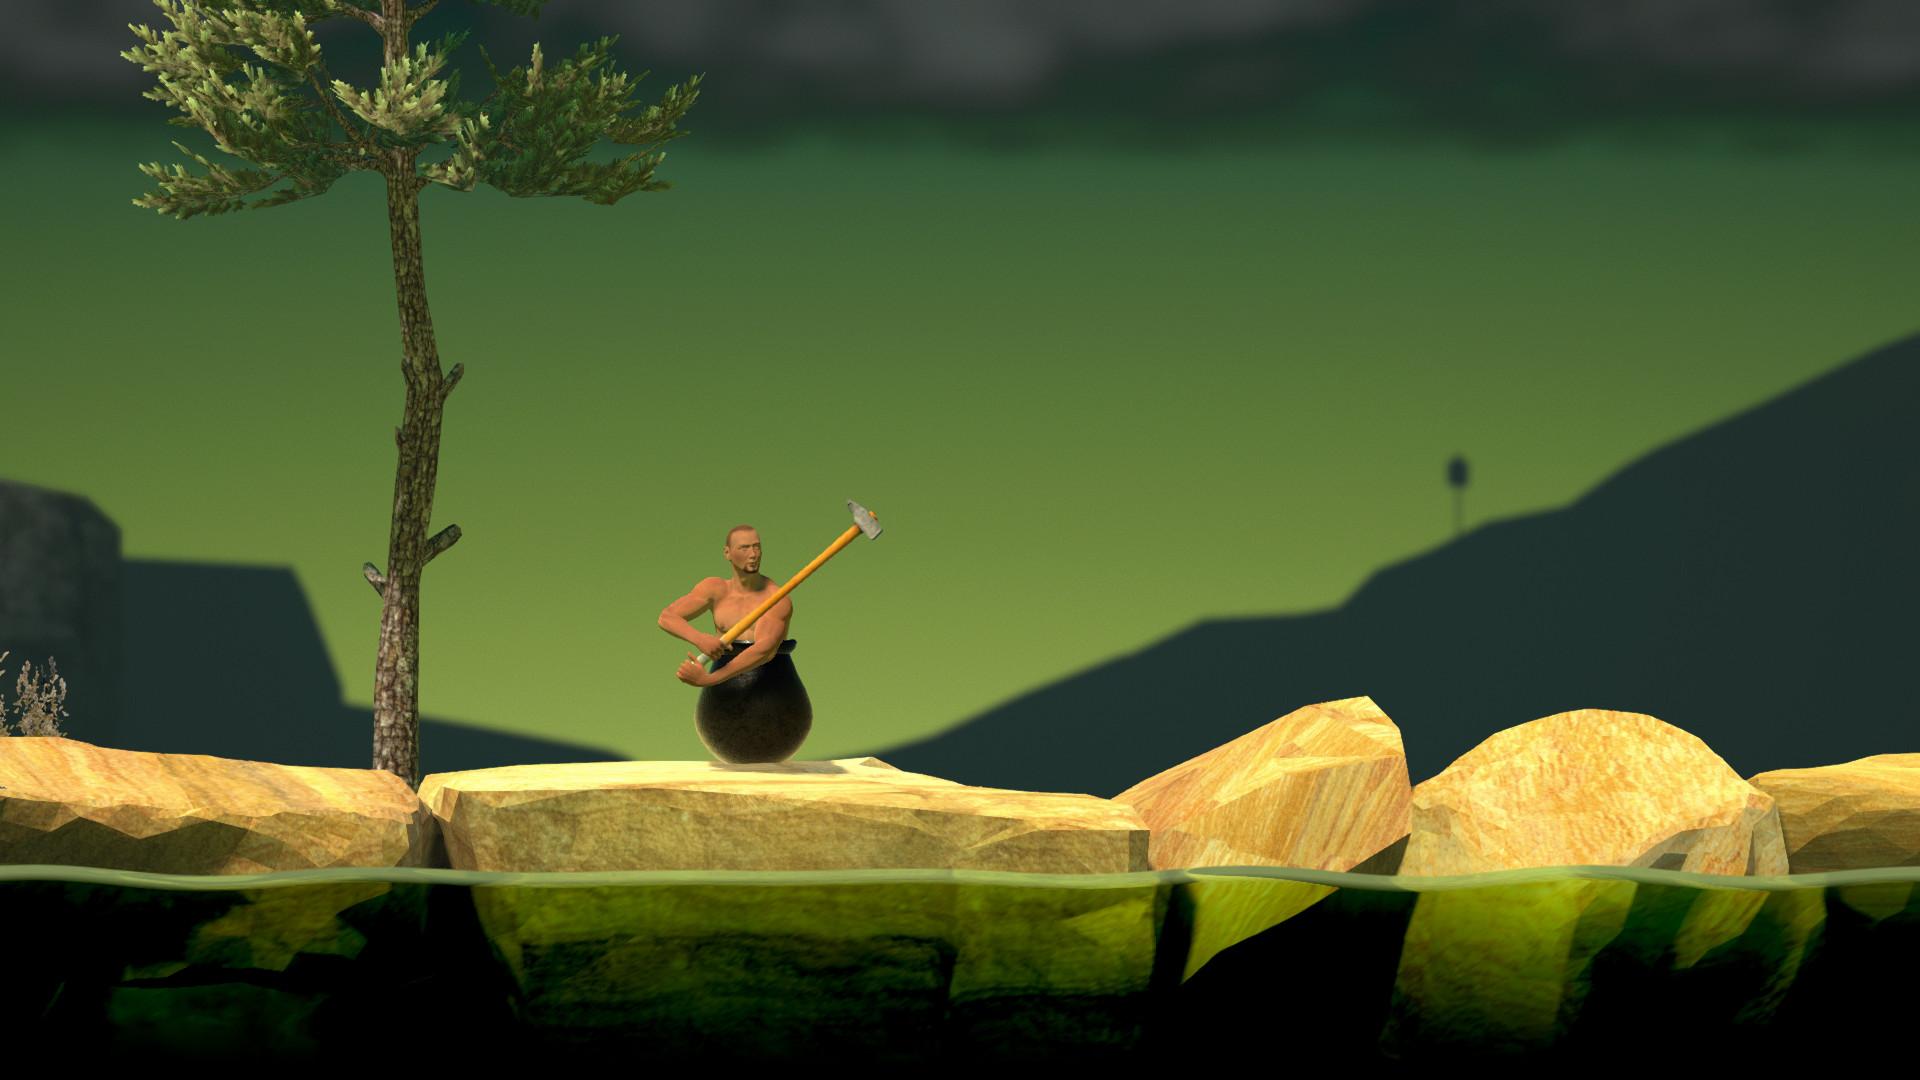 Getting Over It With Bennett Foddy Beginners Guide Tips And Tricks